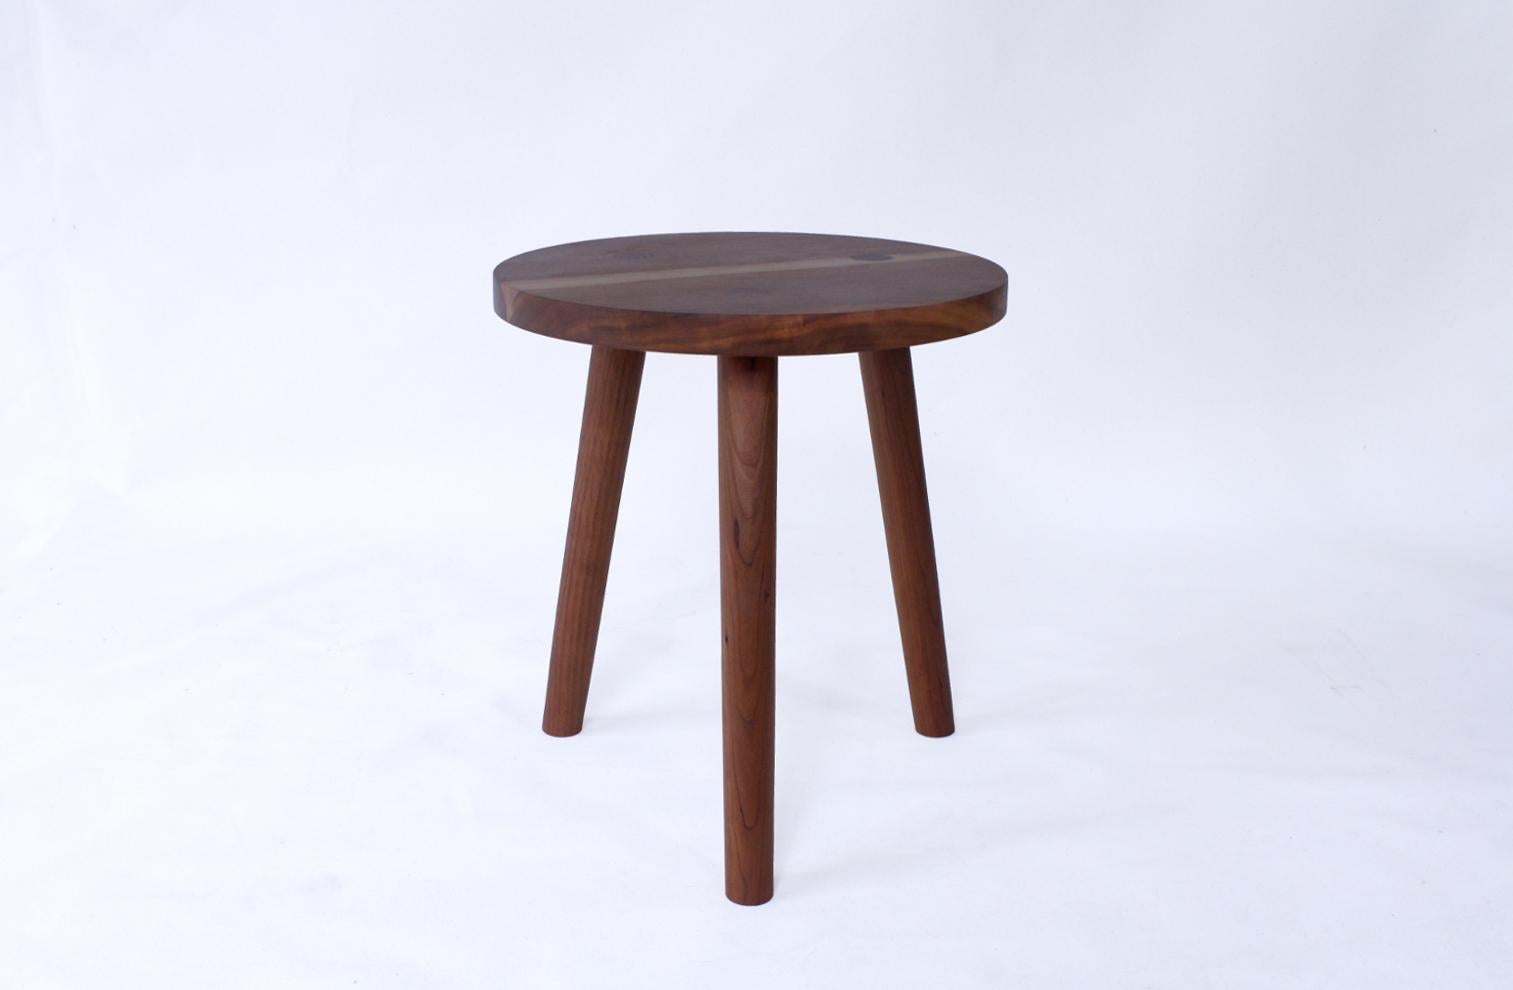 Ebonized Bare a Handmade Wood Stool or Side Table Available in Custom Sizing and Finishes For Sale